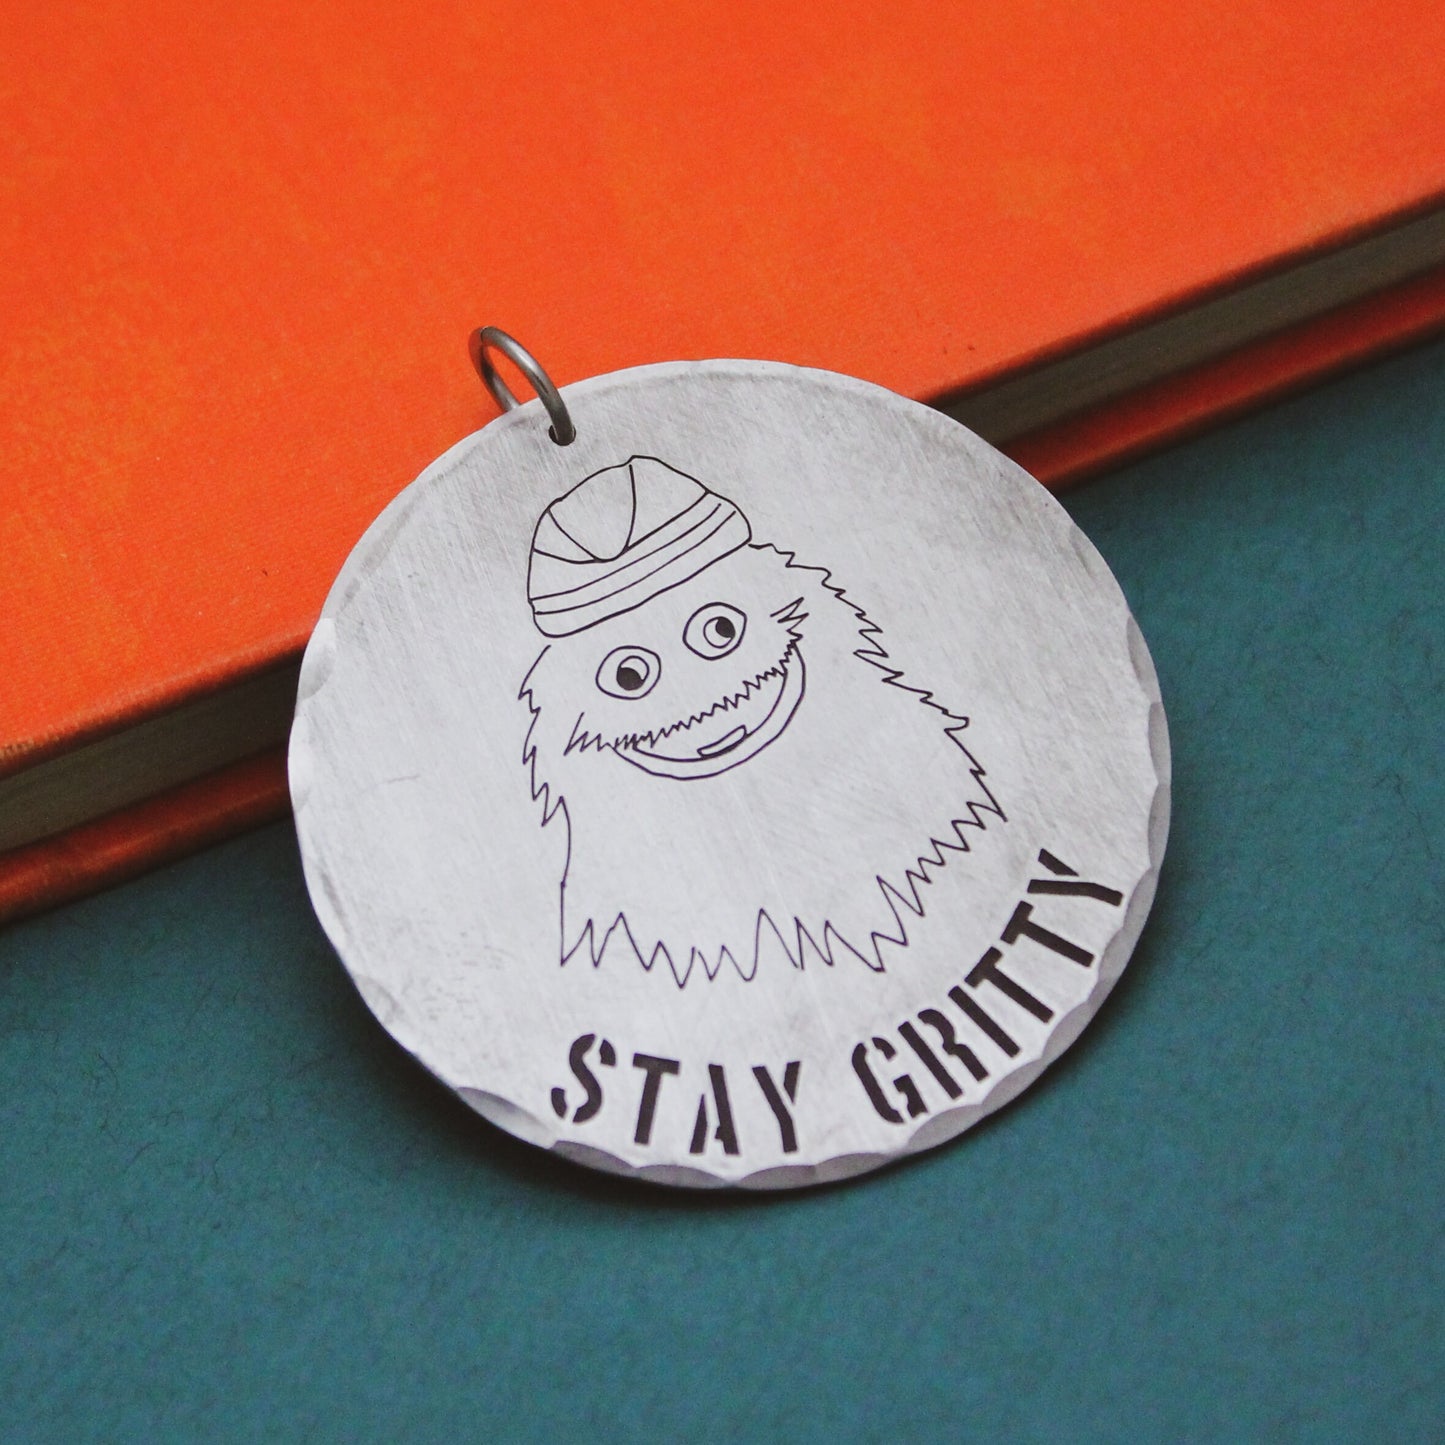 Philadelphia Gritty Christmas Ornament Personalized Aluminum, Merry Gritmas Gritty ornament, Flyers Gritty Cute Ornament, Philadelphia Love